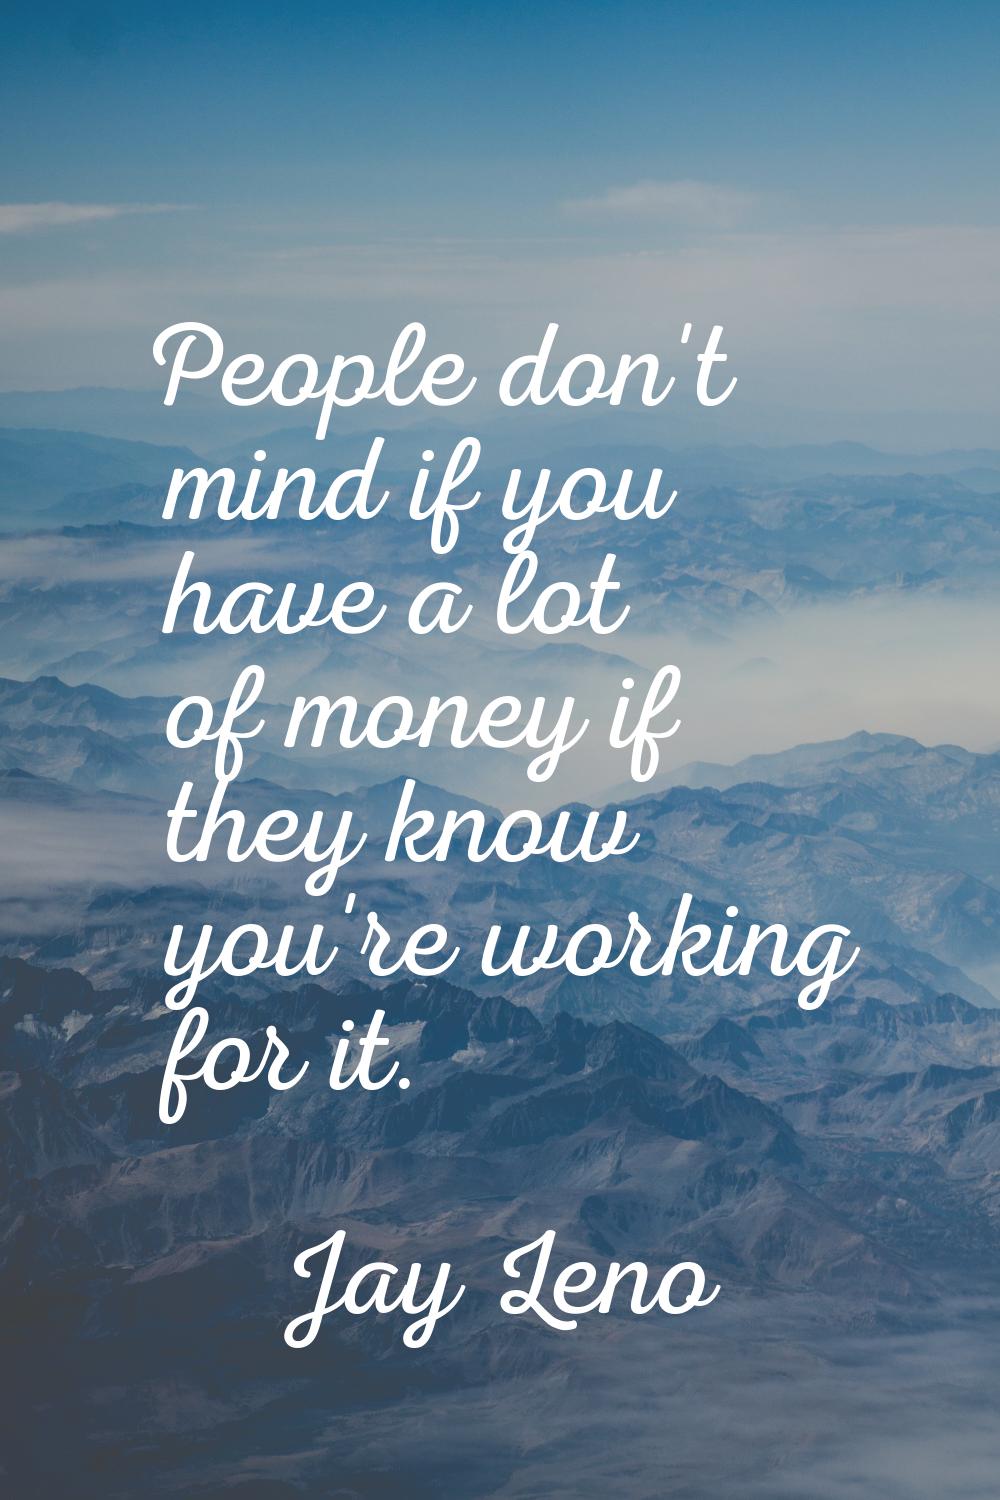 People don't mind if you have a lot of money if they know you're working for it.